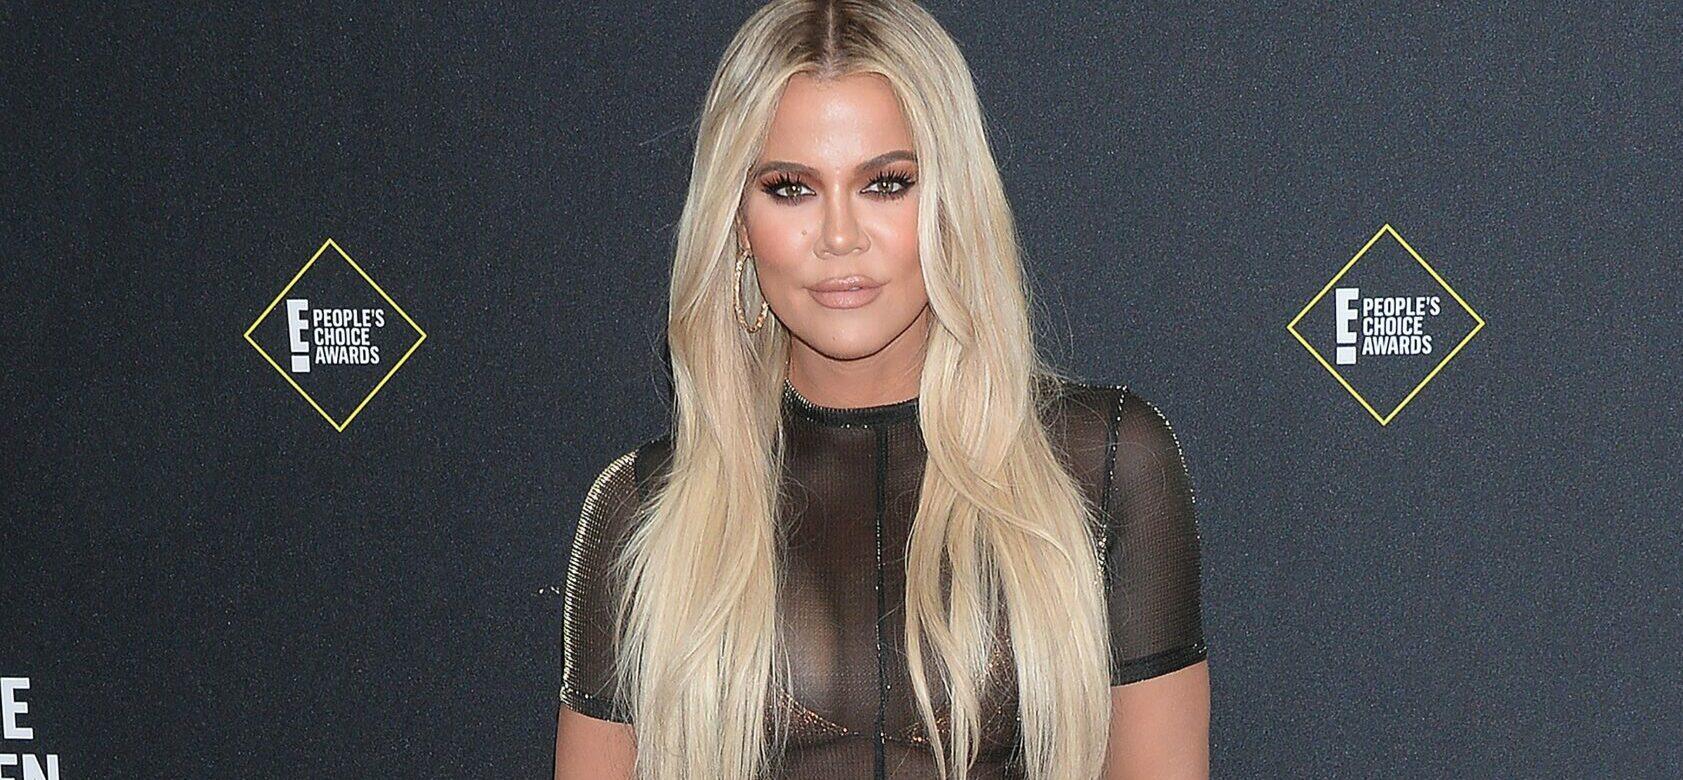 Khloe Kardashian's Migraine Issues Ploy To Sell Medication?!